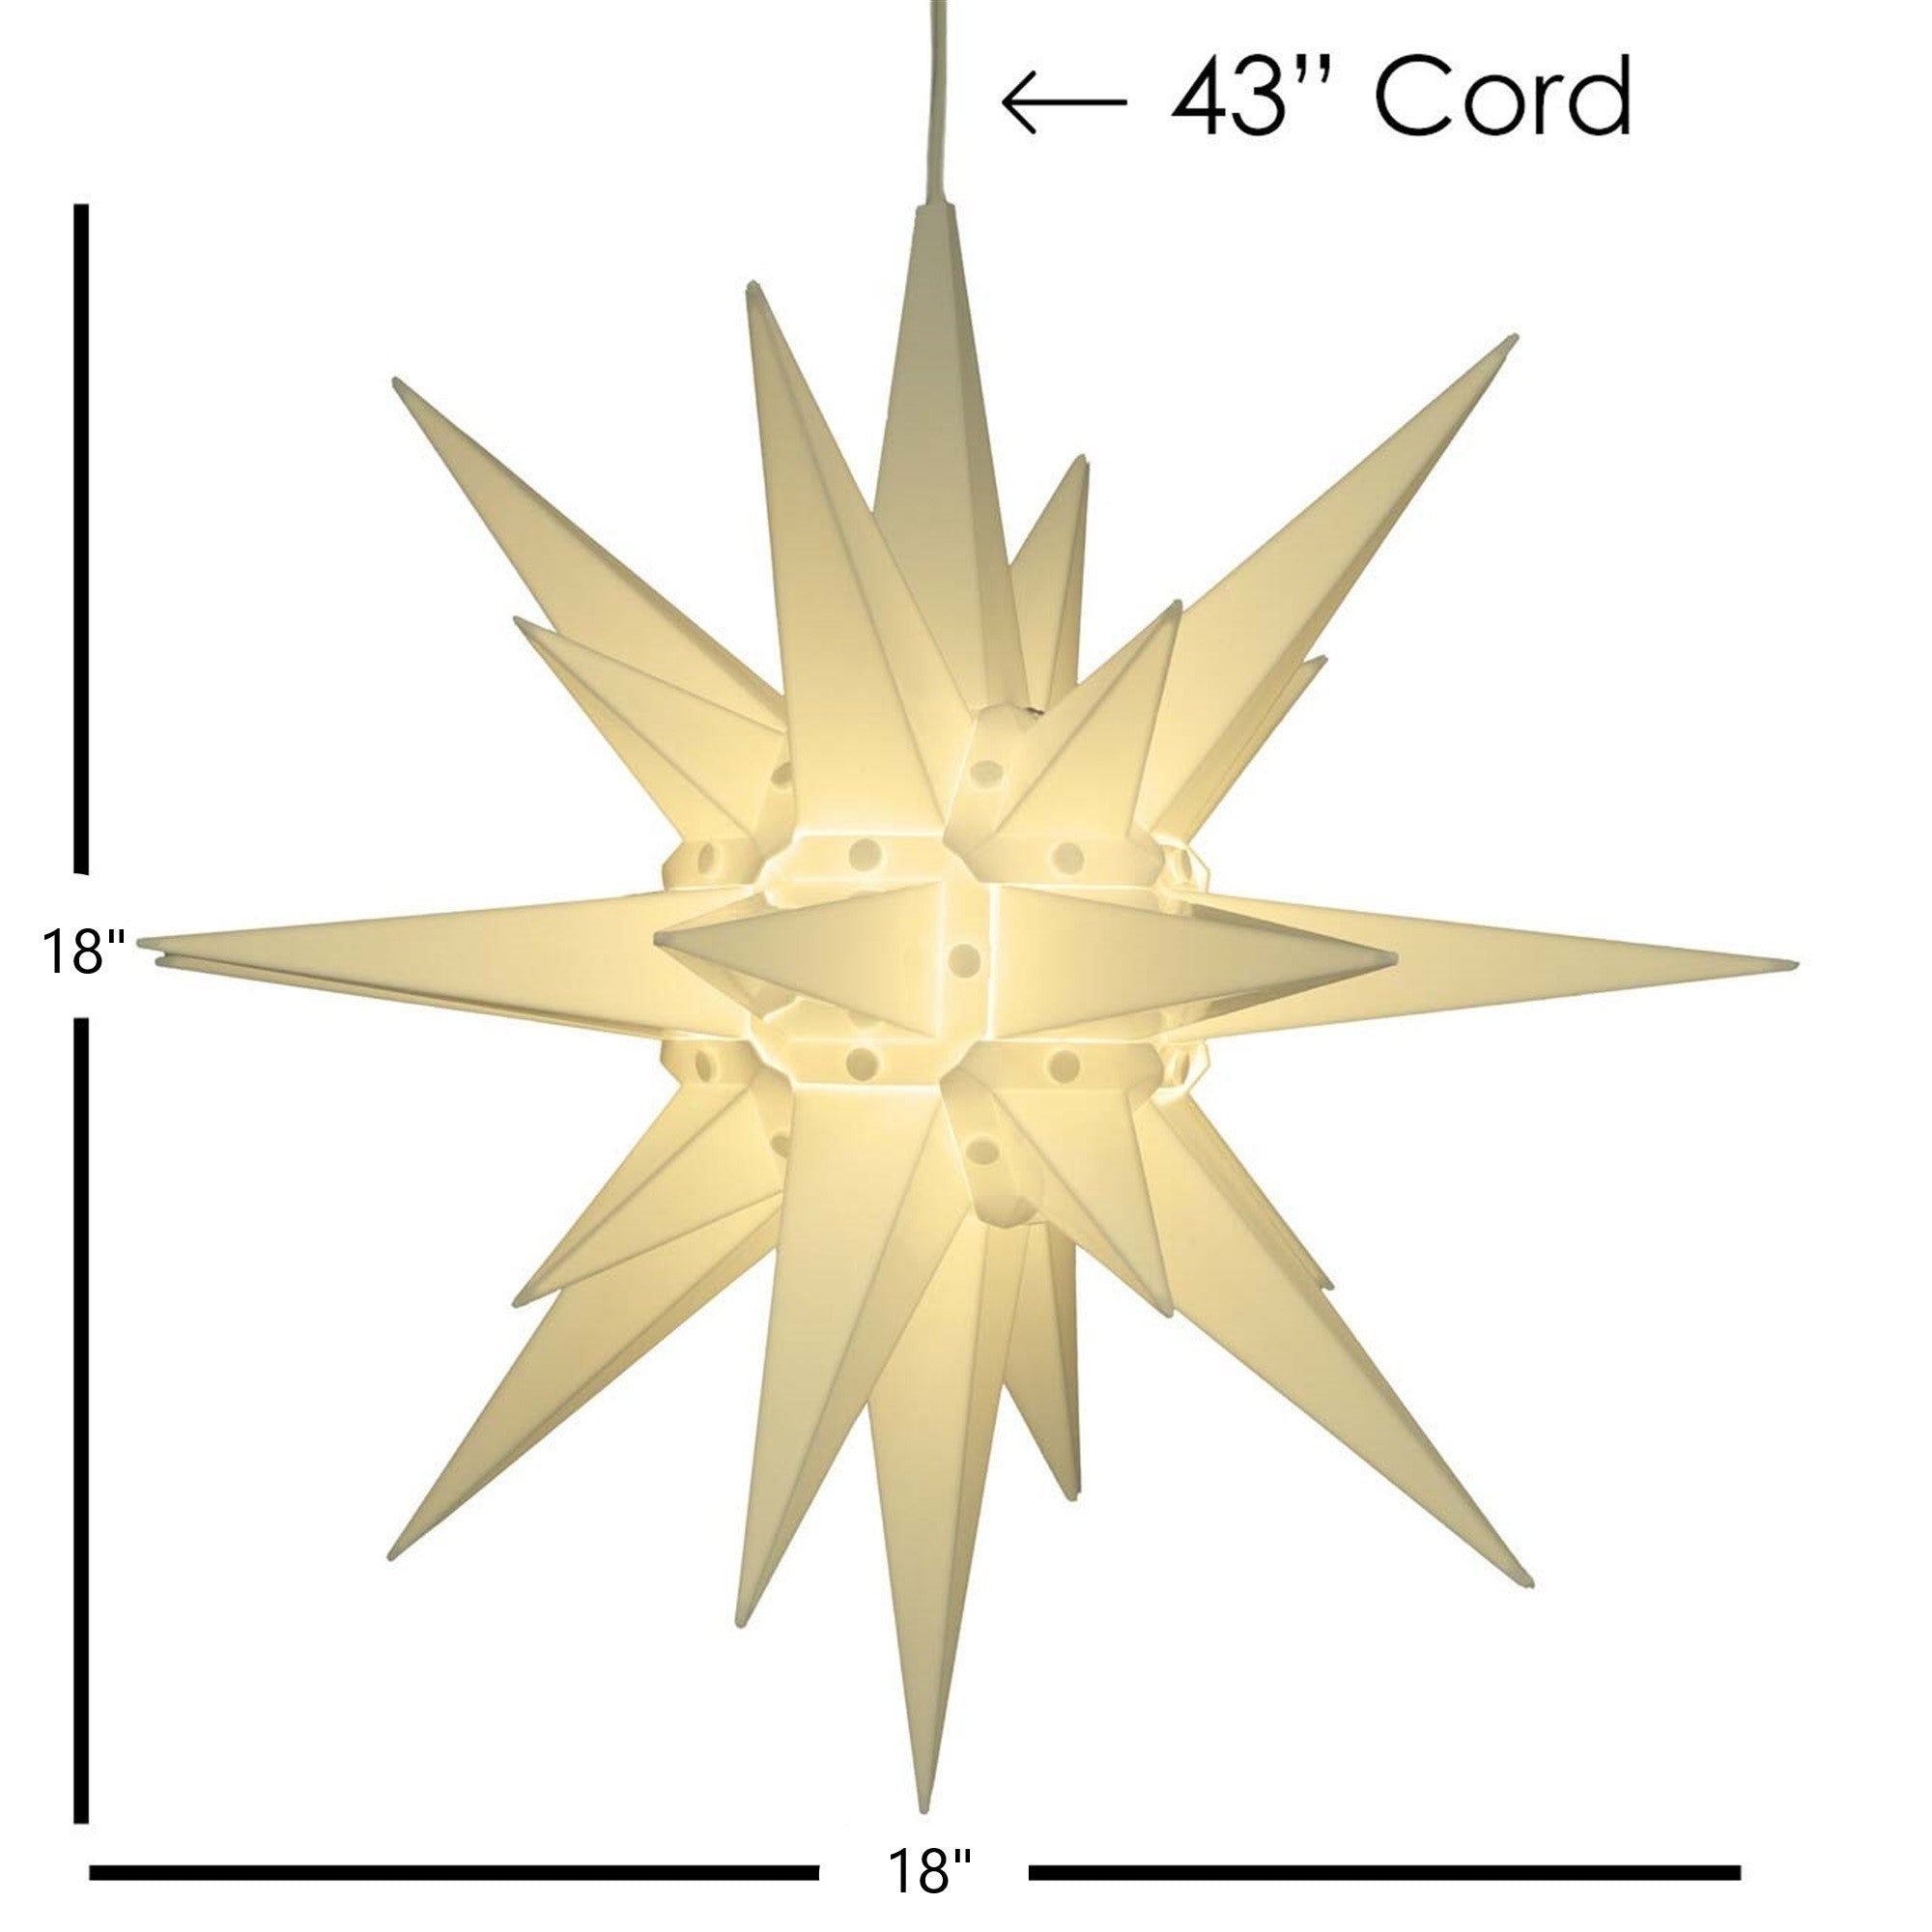 CandleCup Moravian Star Christmas Holiday Outdoor Light Decoration, 18"